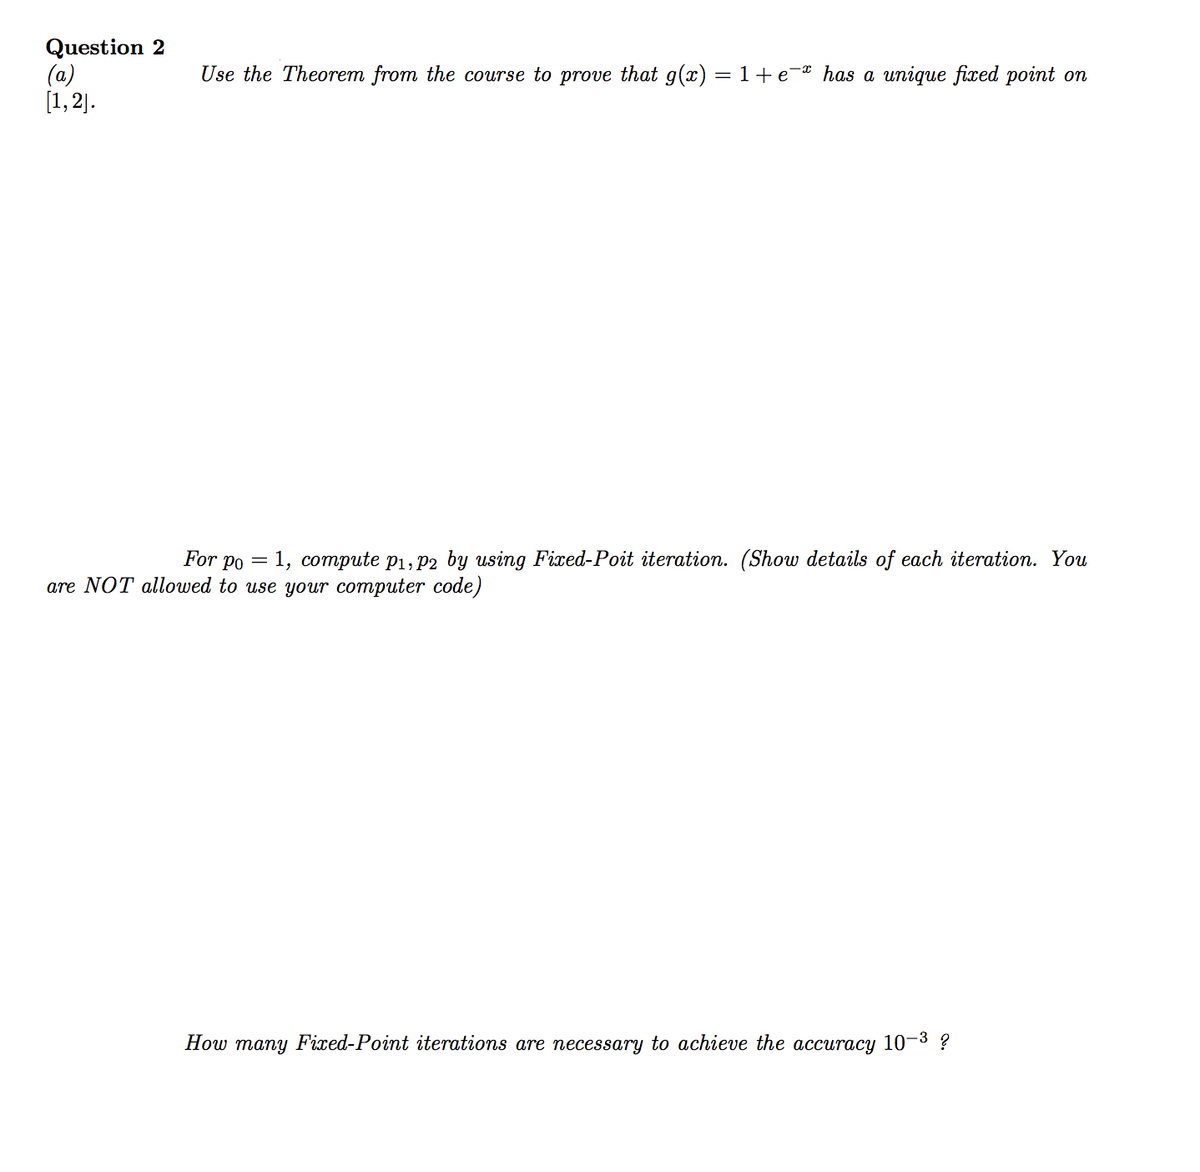 Question 2
(a)
[1, 2].
Use the Theorem from the course to prove that g(x) = 1+ e-® has a unique fixed point on
For po = 1, compute p1, P2 by using Fixed-Poit iteration. (Show details of each iteration. You
are NOT allowed to use your computer code)
How many Fixed-Point iterations are necessary to achieve the accuracy 10-3 ?
